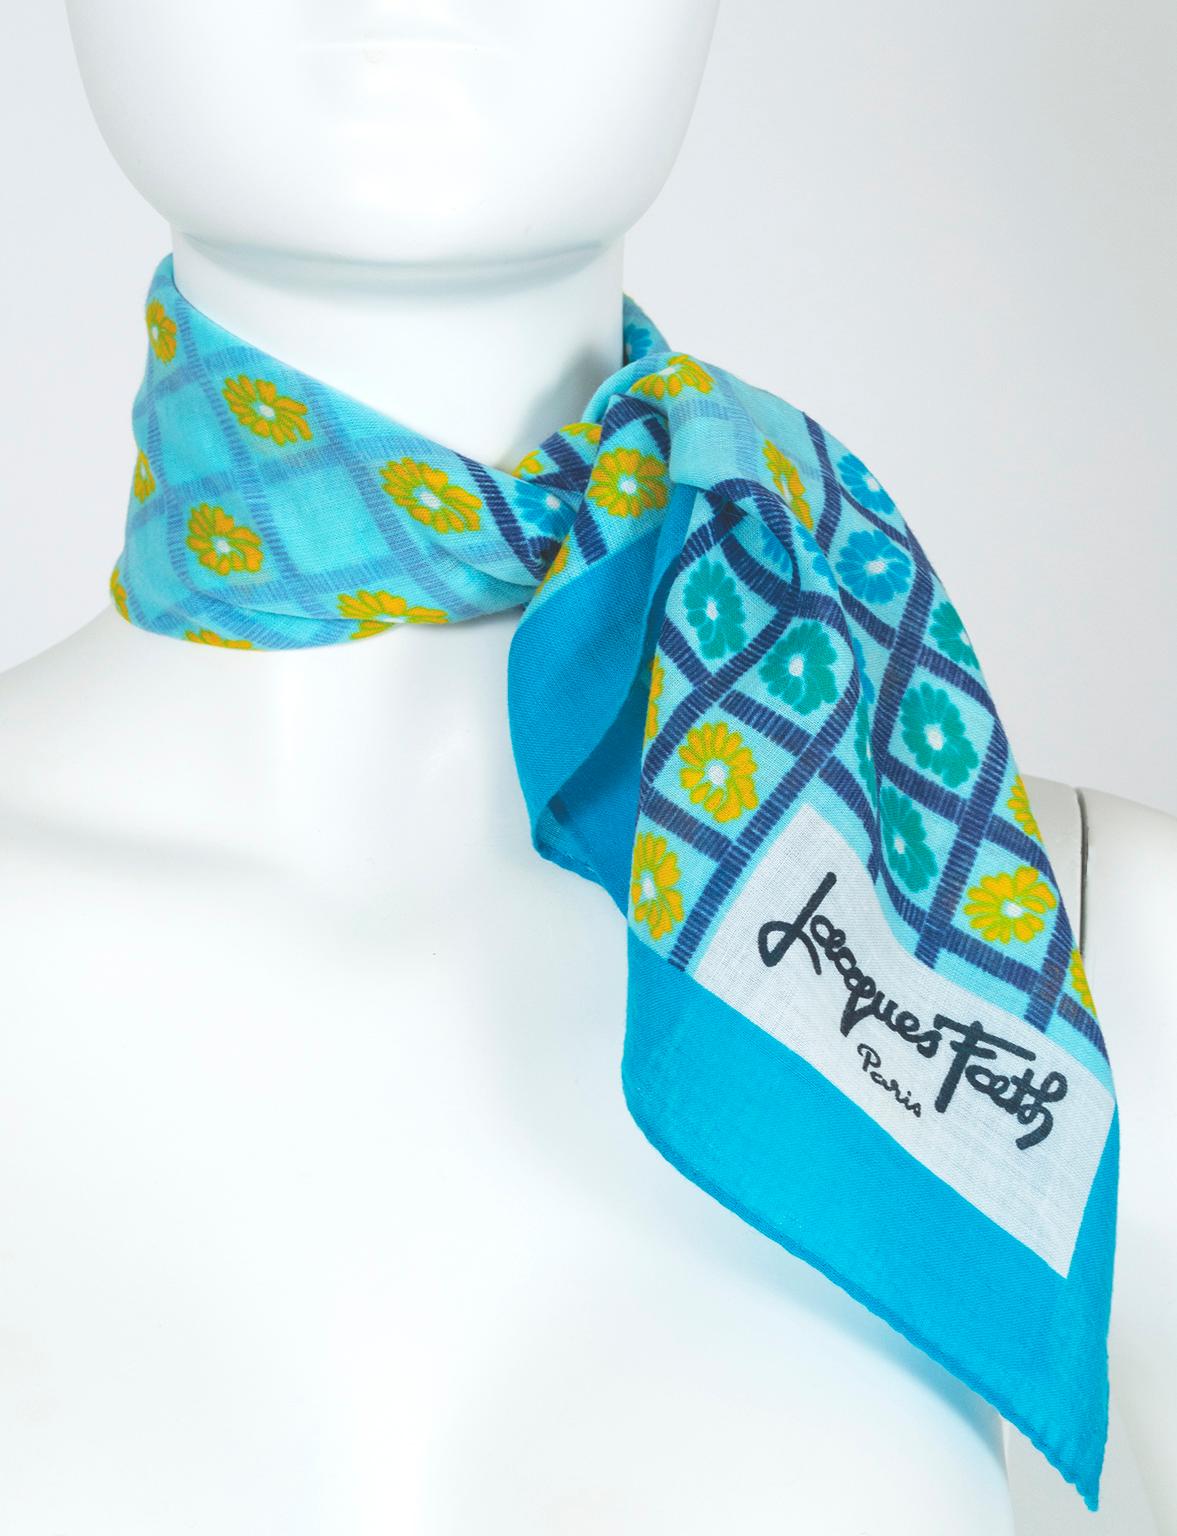 Jacques Fath’s infamous playful side radiates from this cheerful summer scarf, featuring bursts of intense color and machine washable cotton lawn.

Single-ply lightweight cotton scarf with rolled edges. Square format features turquoise ground with a